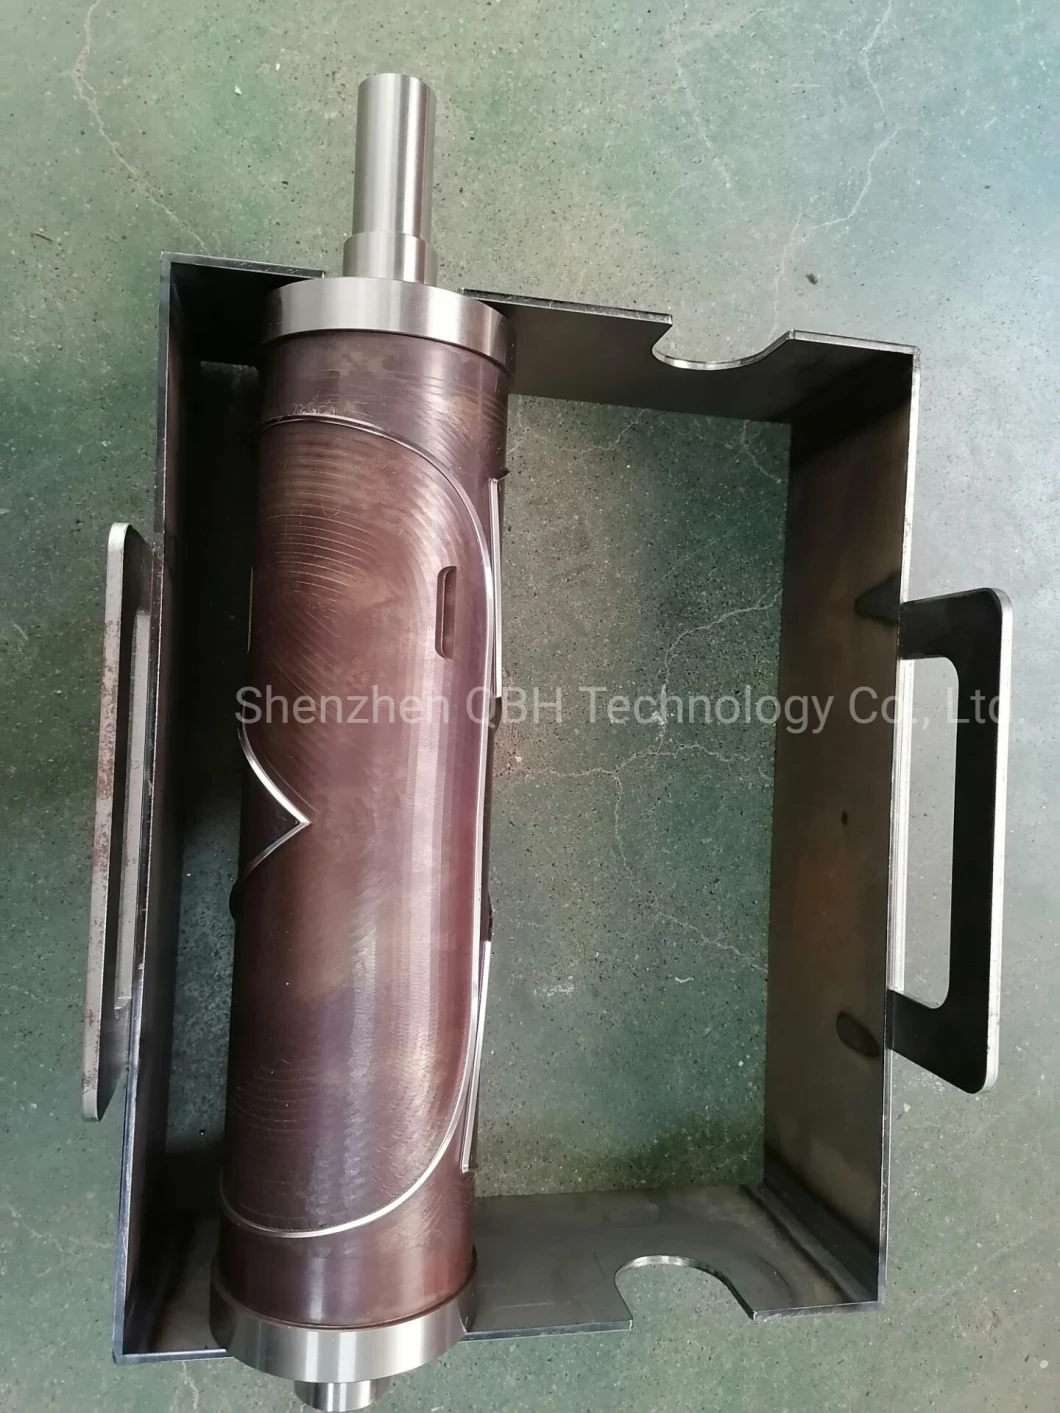 Knife Knurling Shaft and Embossing Roller for Kn95 Mask Machine